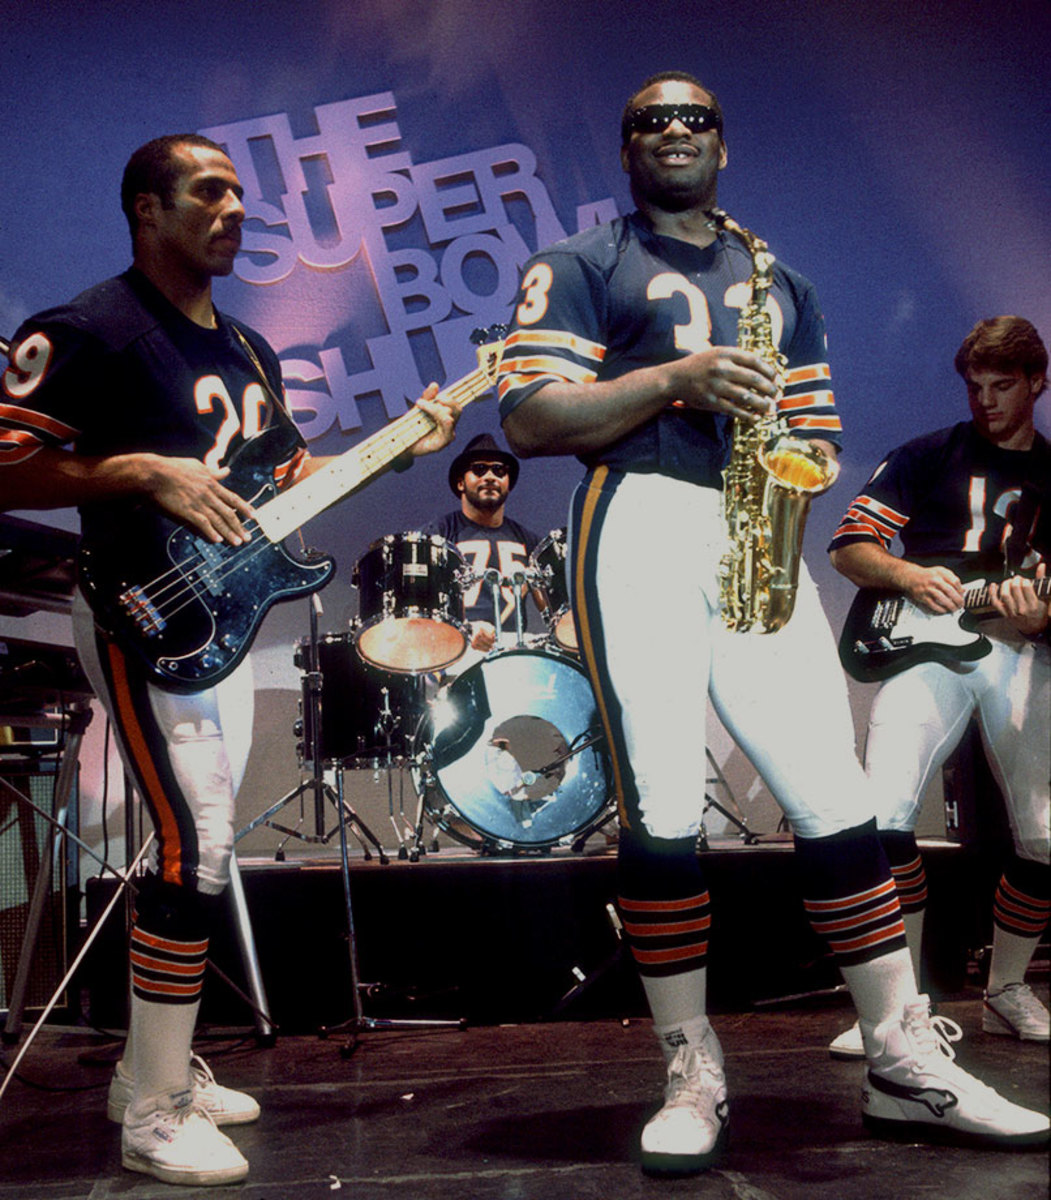 Willie Gault relives UT days, compares Super Bowl Shuffle with